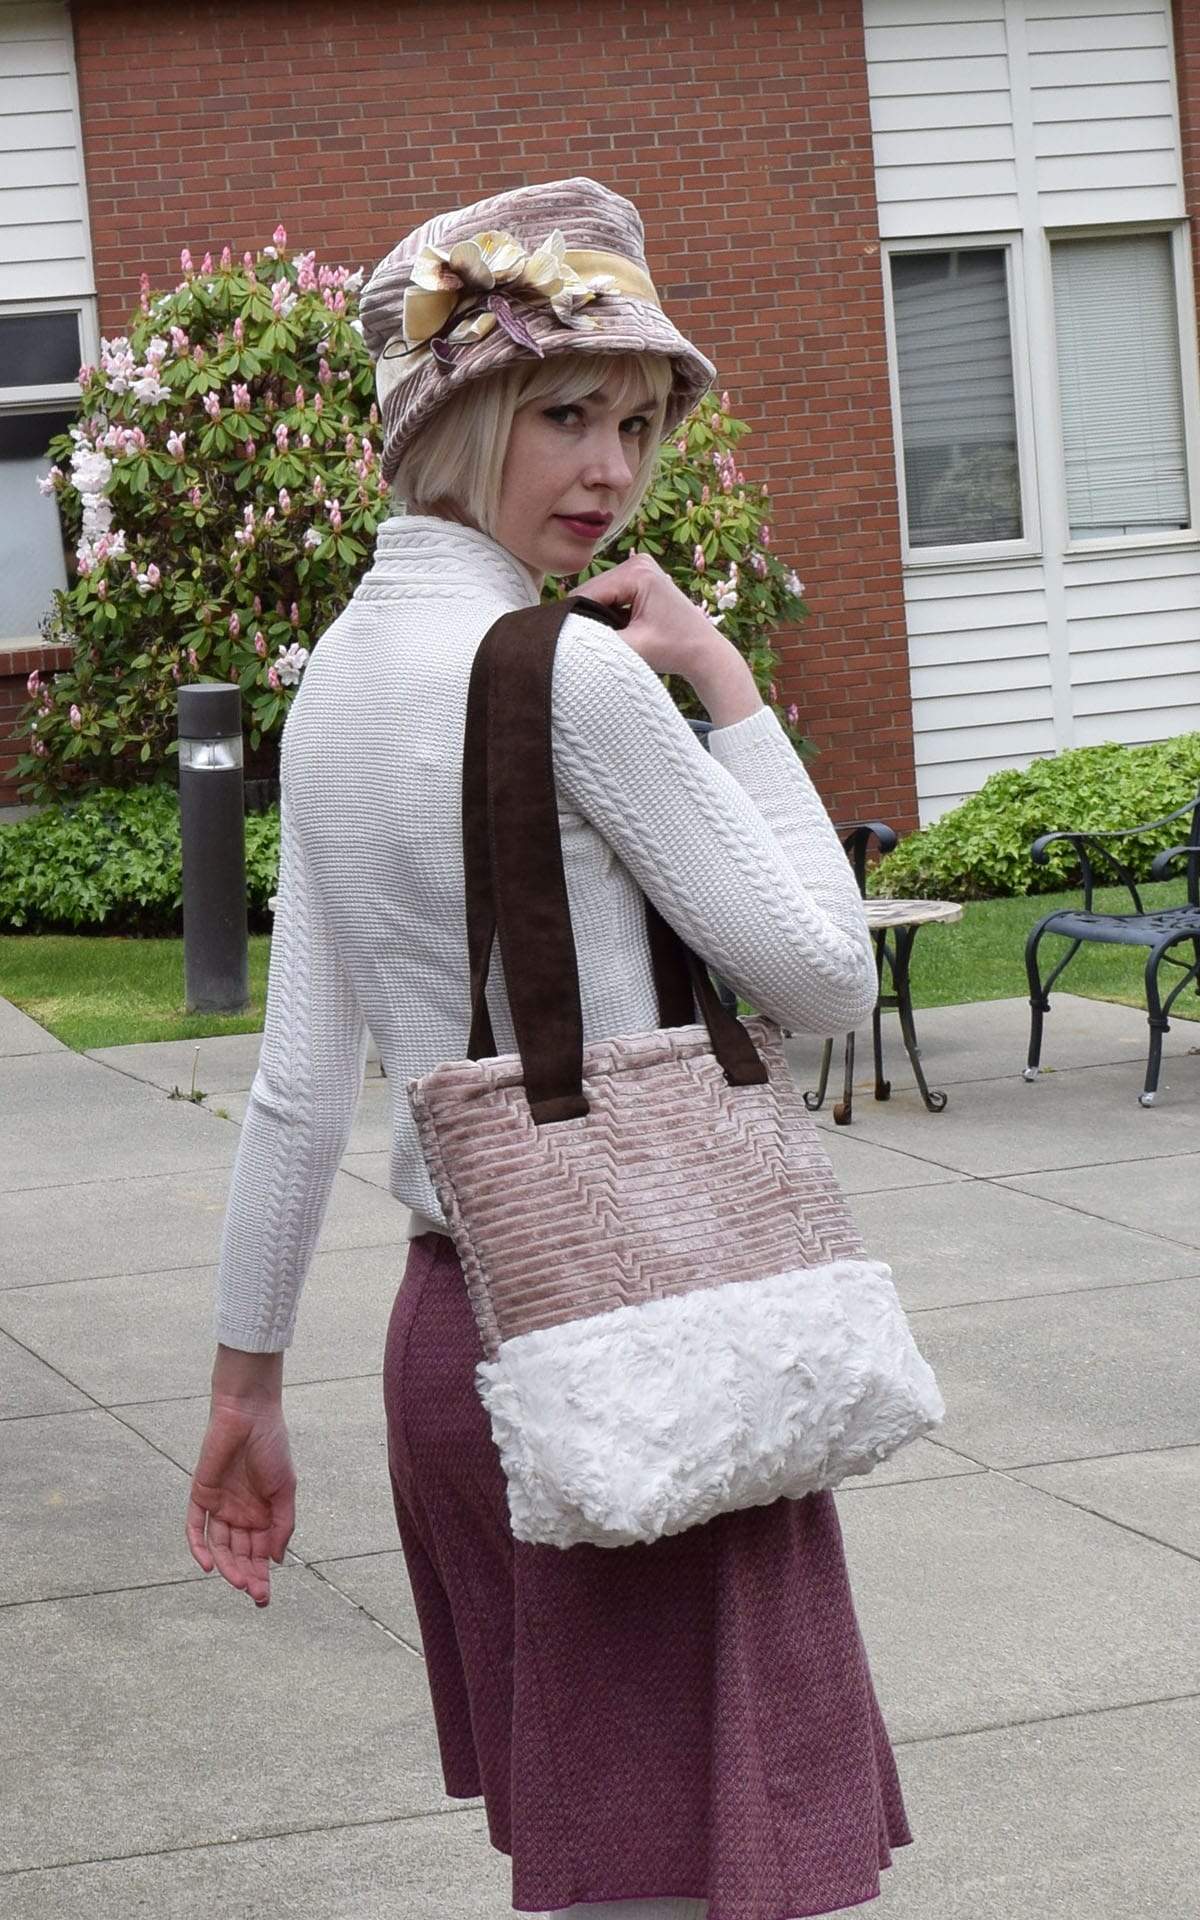 Tokyo Tote - Chenille in Cherry Blossom (SOLD OUT)